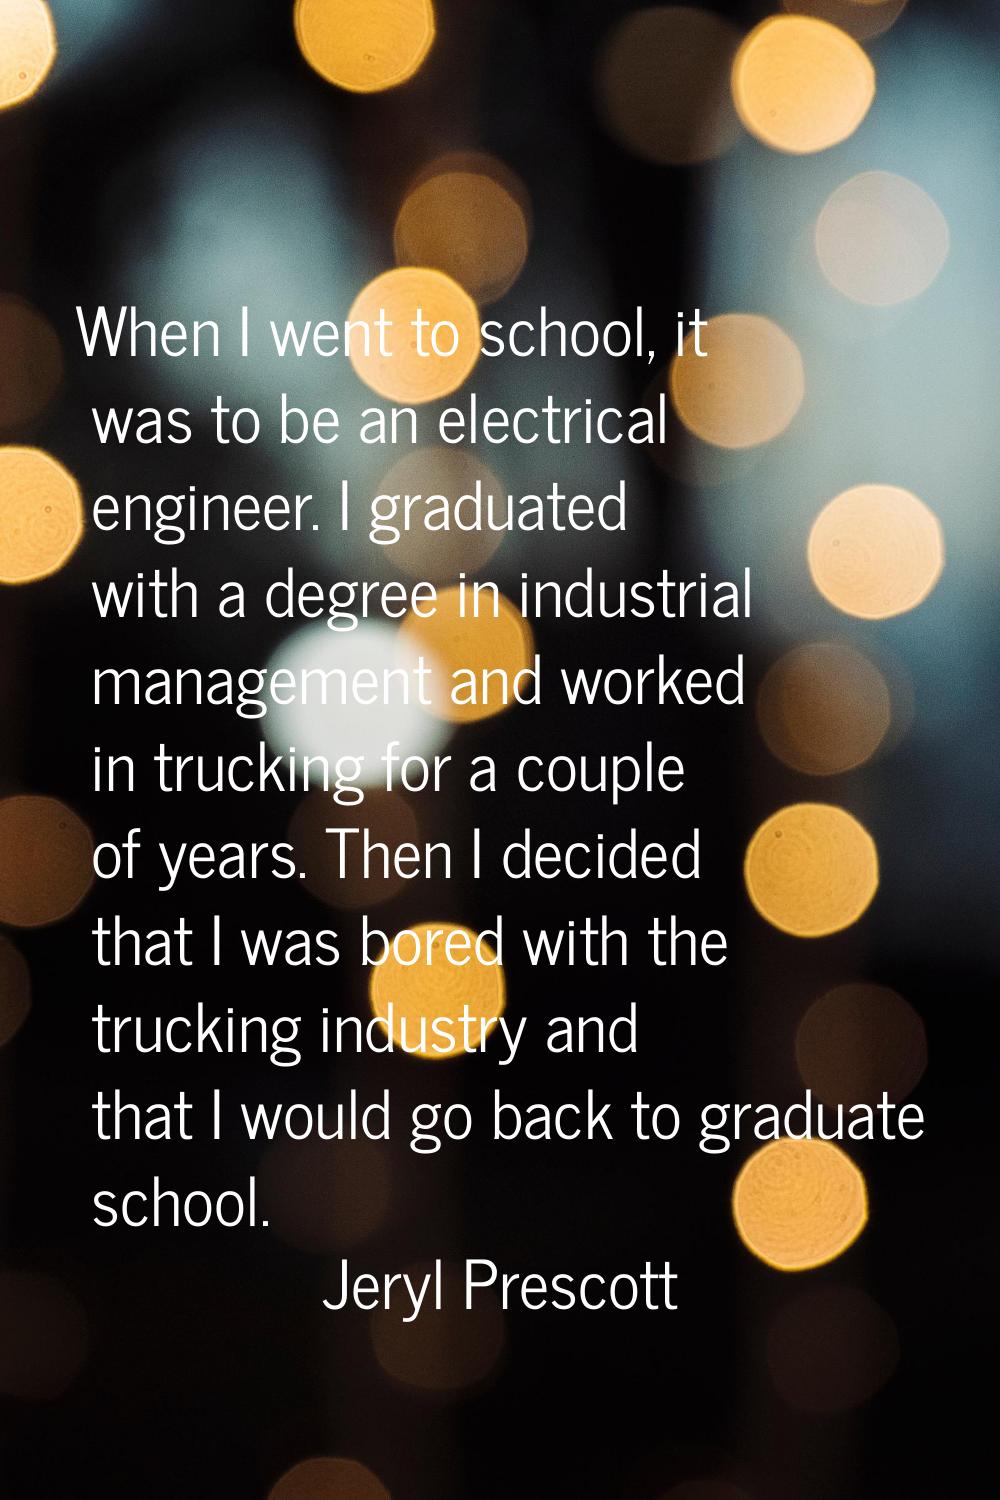 When I went to school, it was to be an electrical engineer. I graduated with a degree in industrial